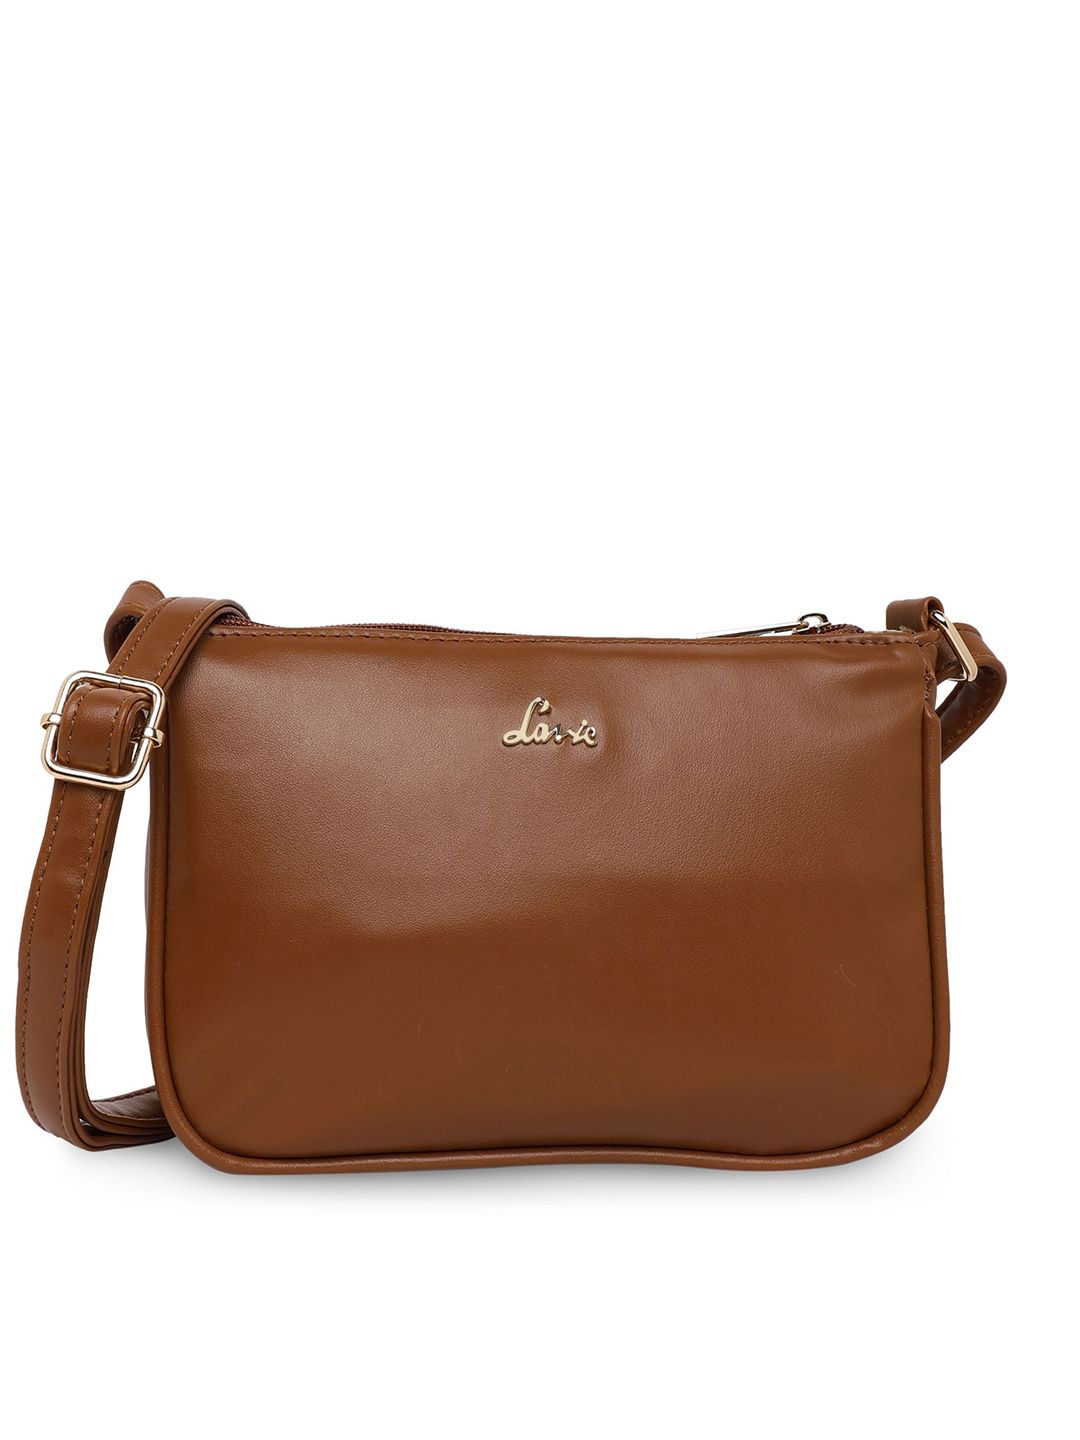 Lavie Tan Brown Solid Structured Sling Bag Price in India